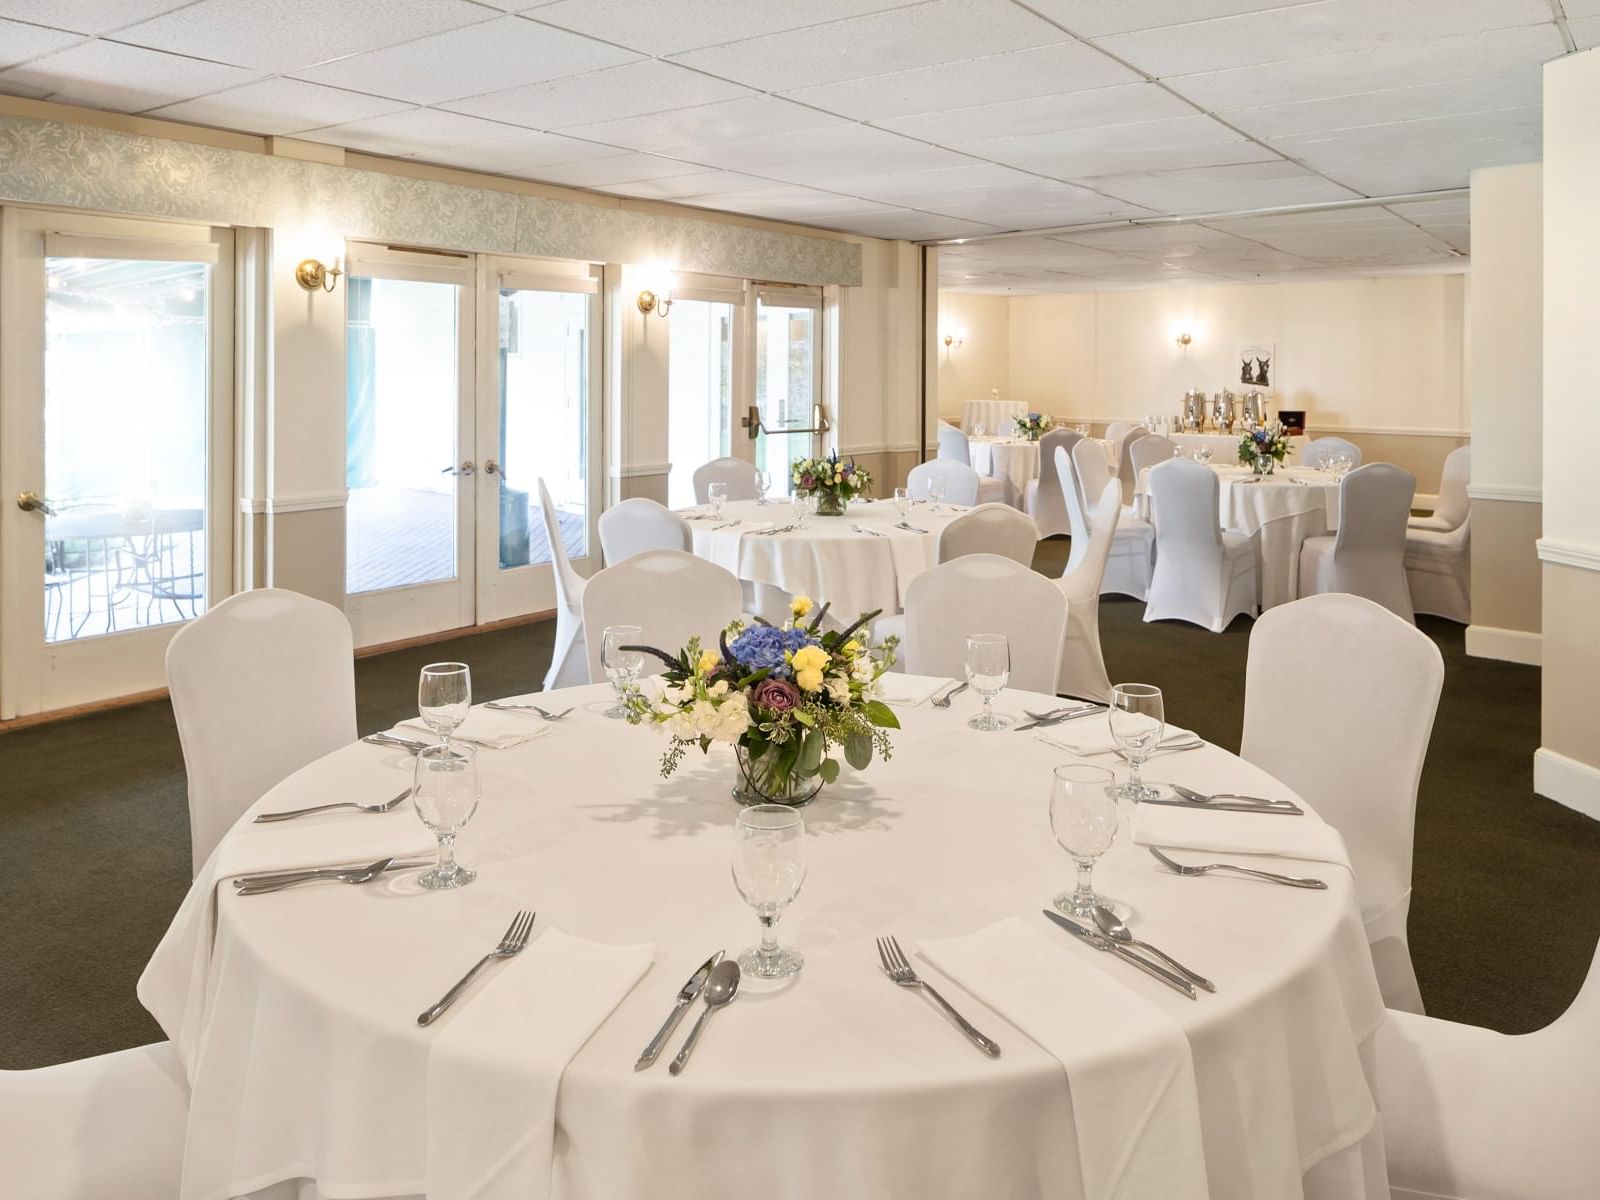 Banquet rounds arranged in the Merrymeeting Room at Harraseeket Inn by Ogunquit Collection